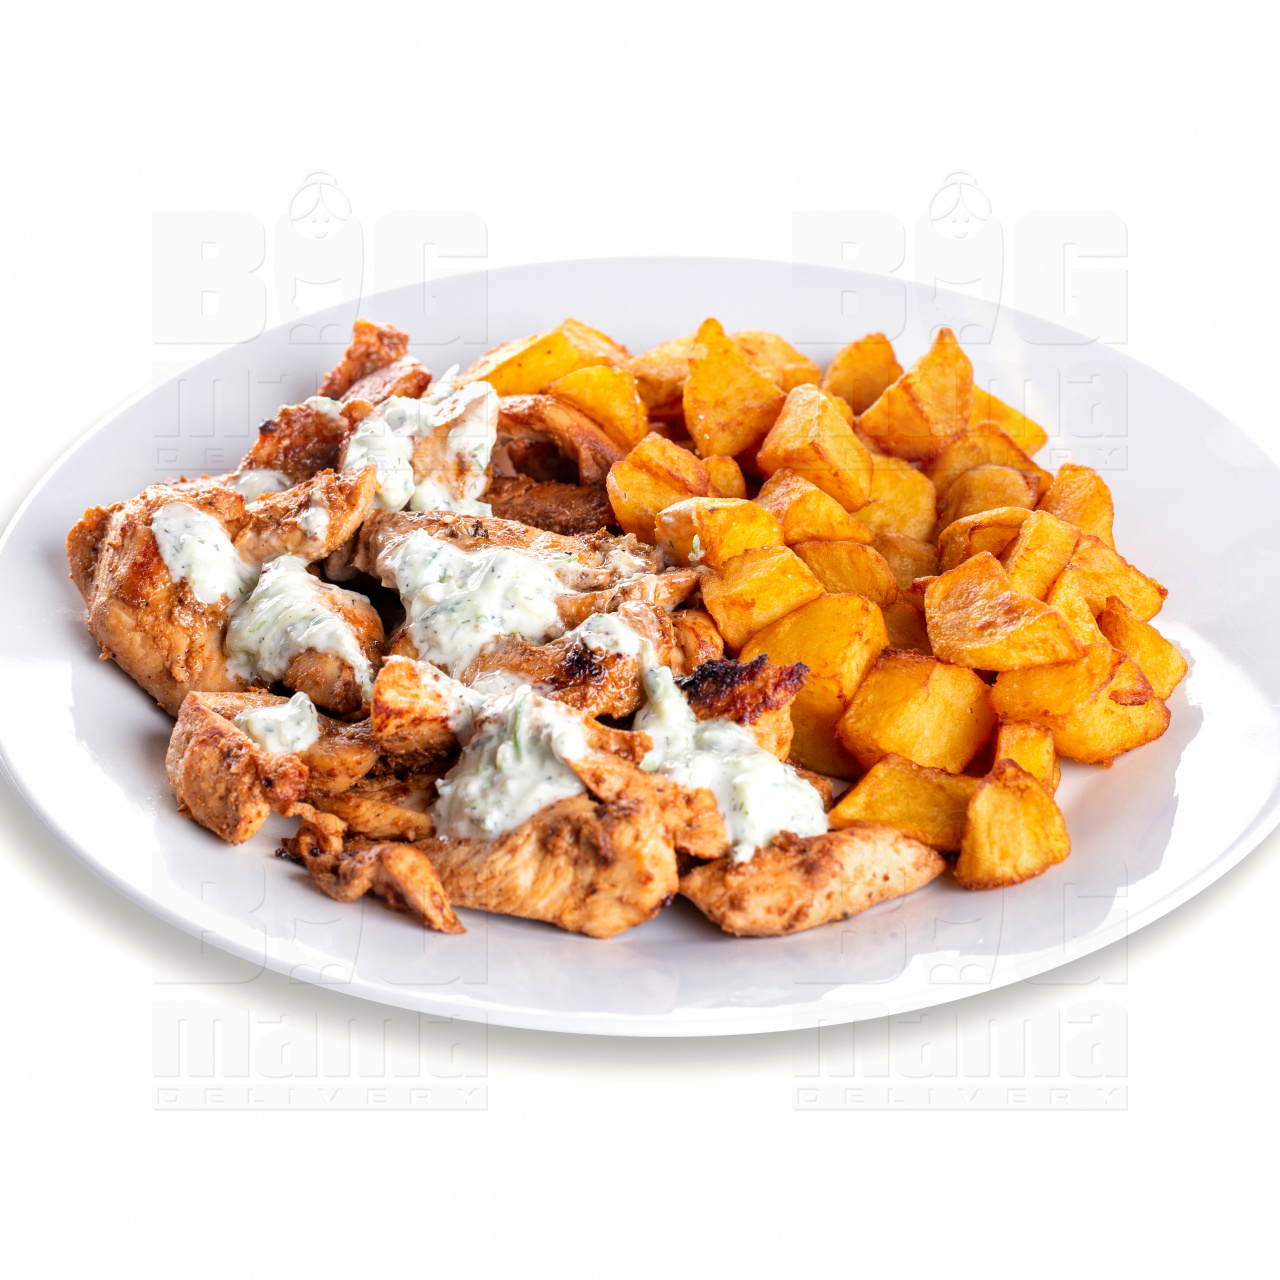 Product #245 image - BBQ chicken bites with golden potato cubes and tzatziki sauce